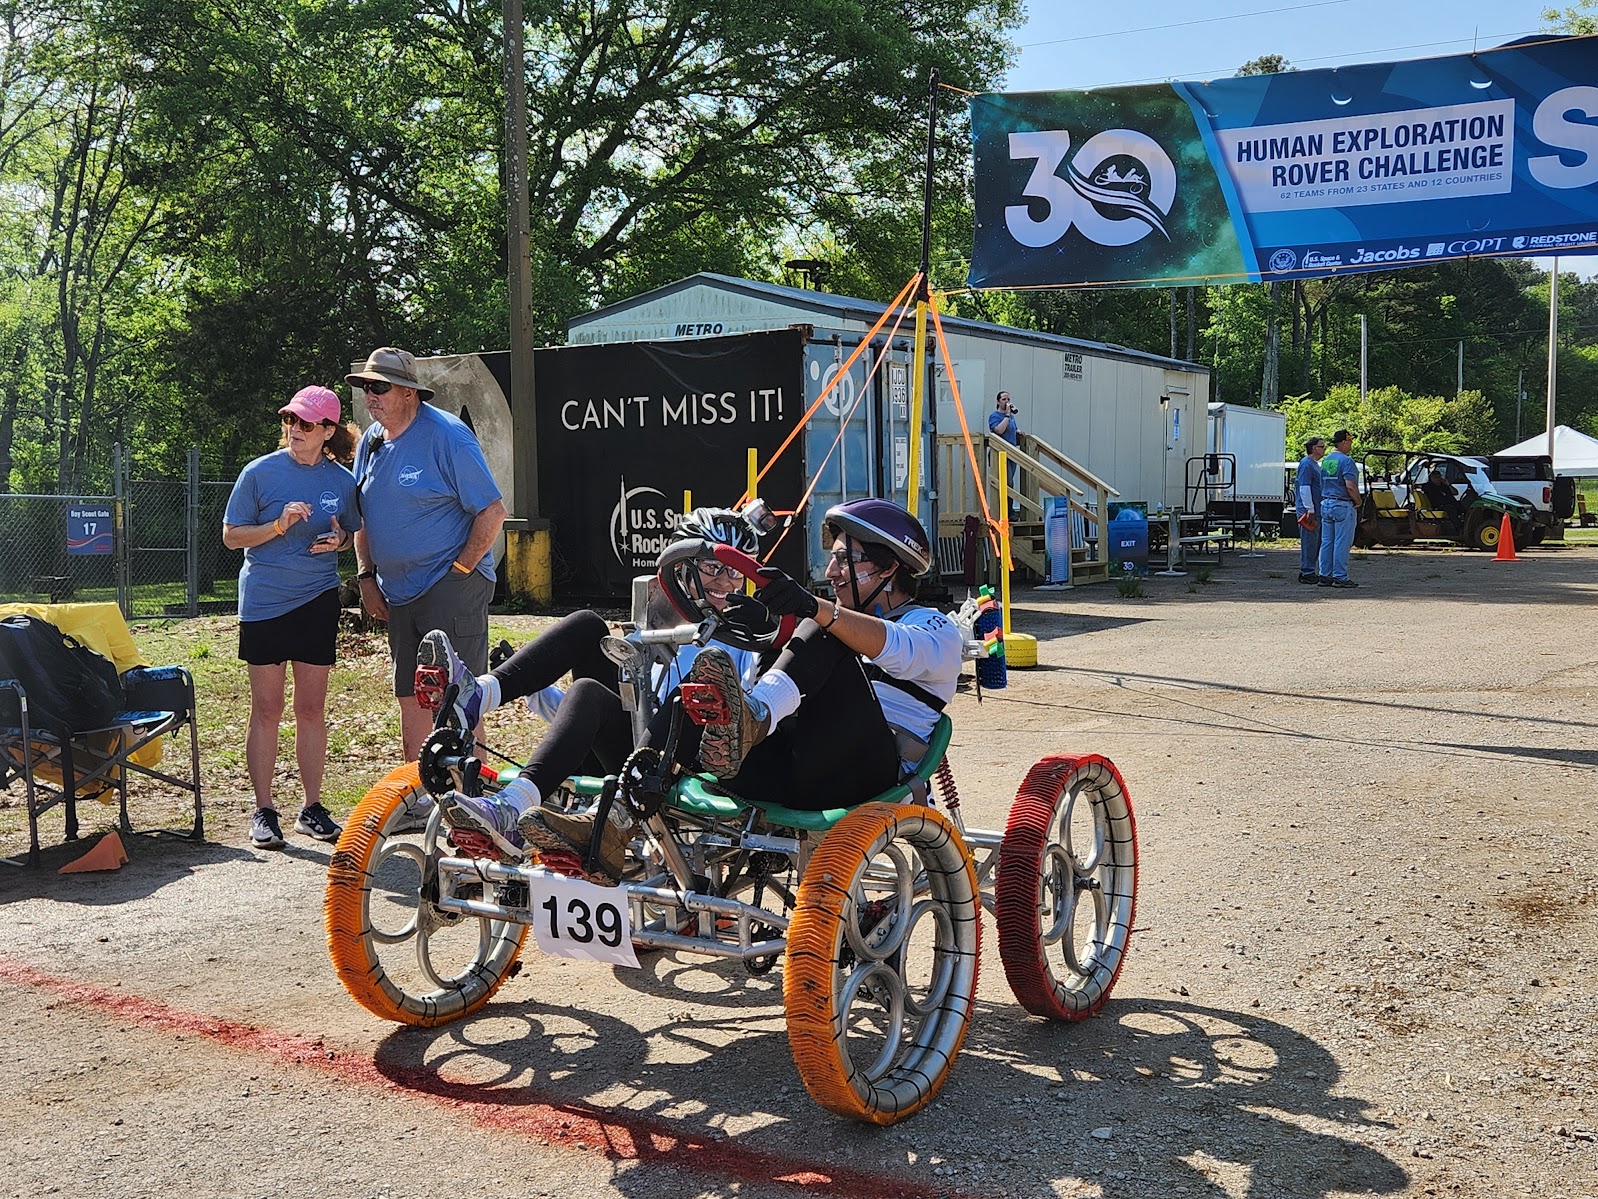 NASA Announces 30th Human Exploration Rover Challenge Winners ...